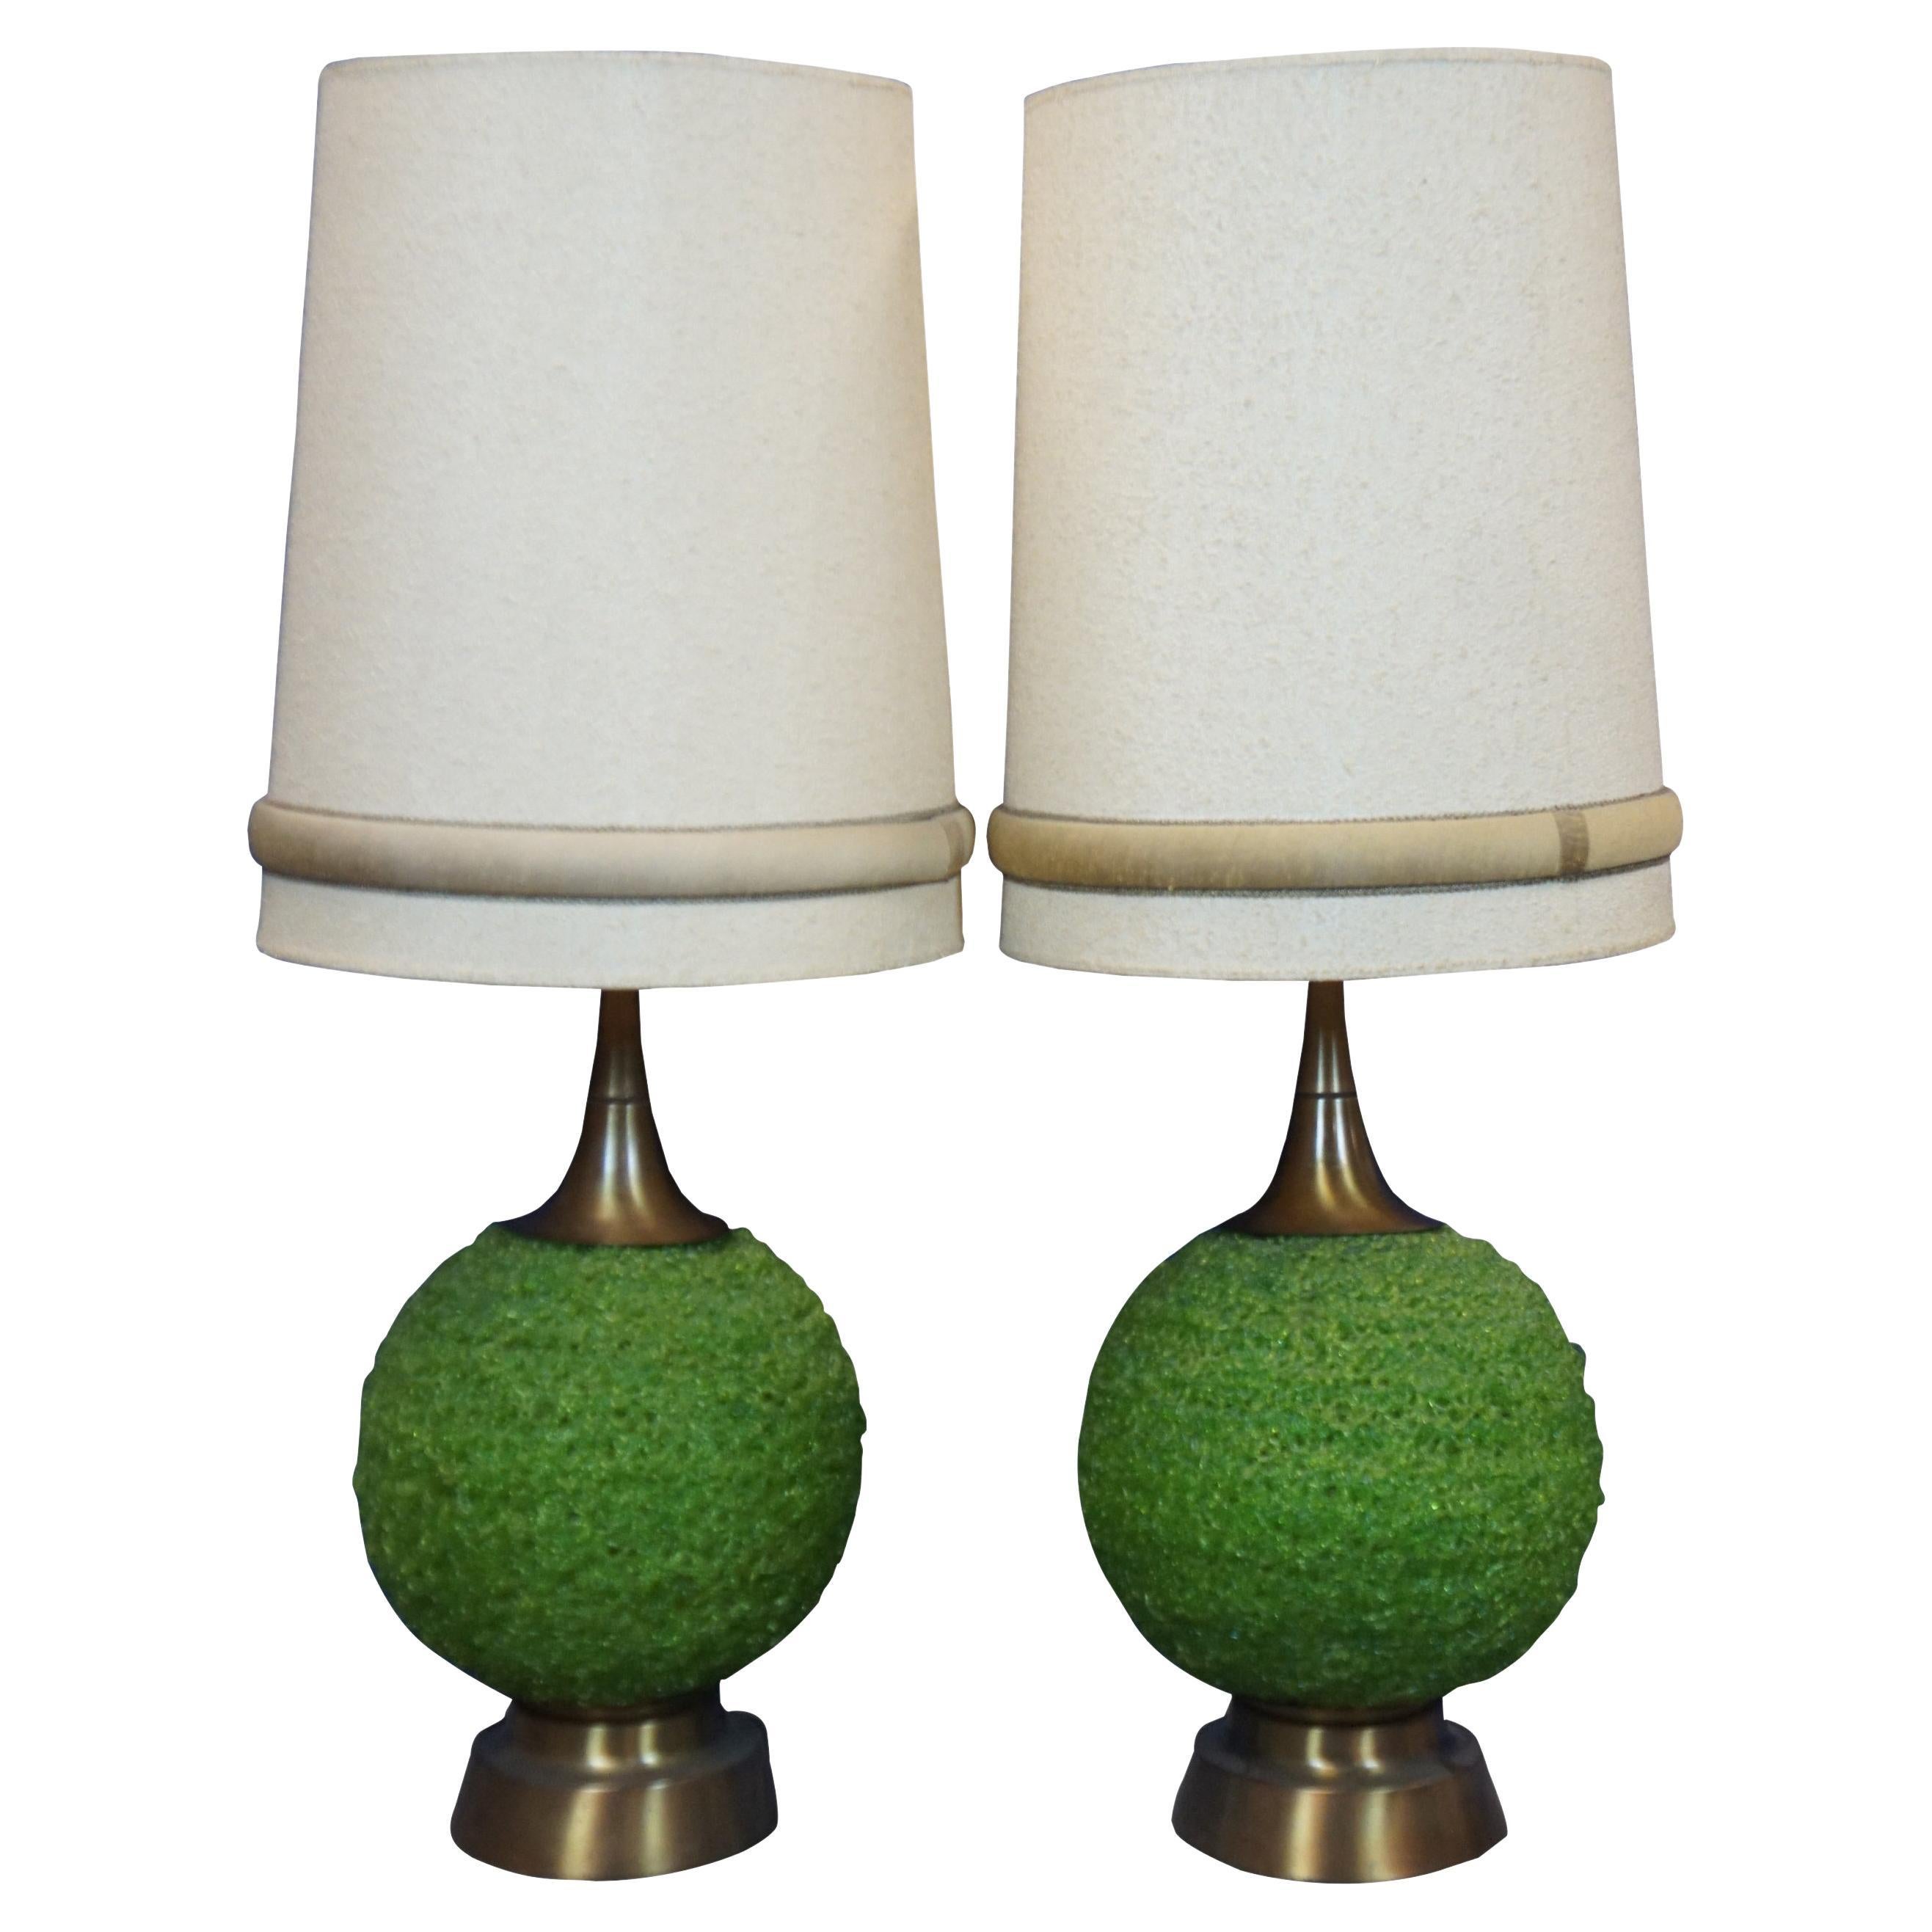 2 Mid-Century Modern Atomic Spun Lucite Green Spaghetti Table Lamps For Sale